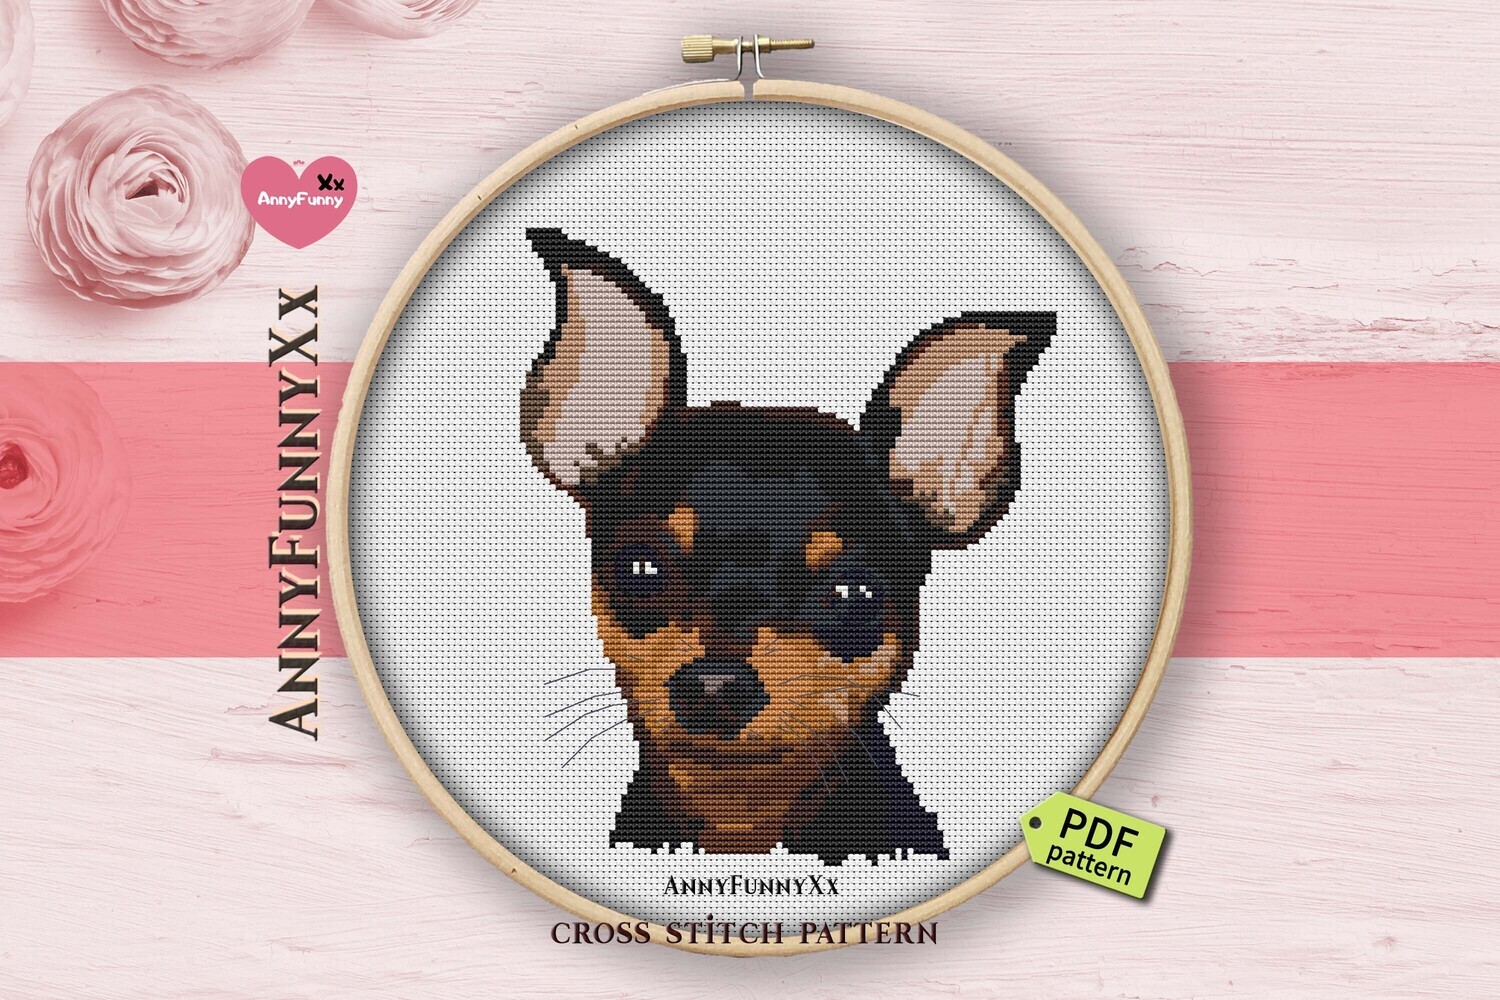 Chihuahua cross stitch pattern Chorkie dog Short-Haired brown dogs Chihuahua gifts for men Pet memorial gift for chihuahua dog mom dad
This PDF counted cross stitch patterns available for instant down